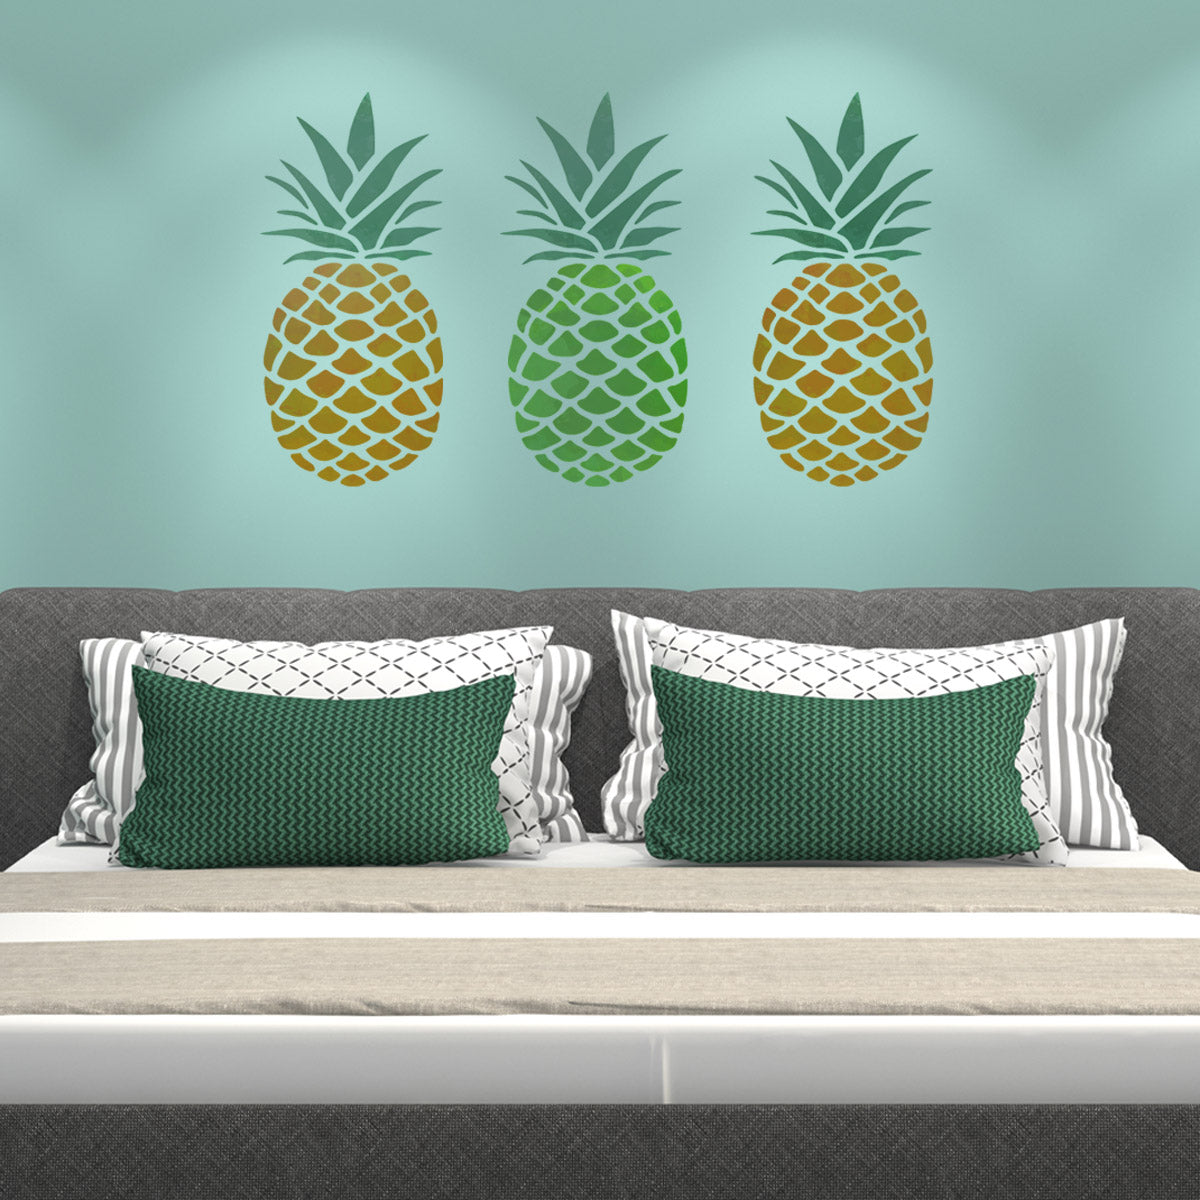 CraftStar Large Pineapple Stencil on bedroom wall